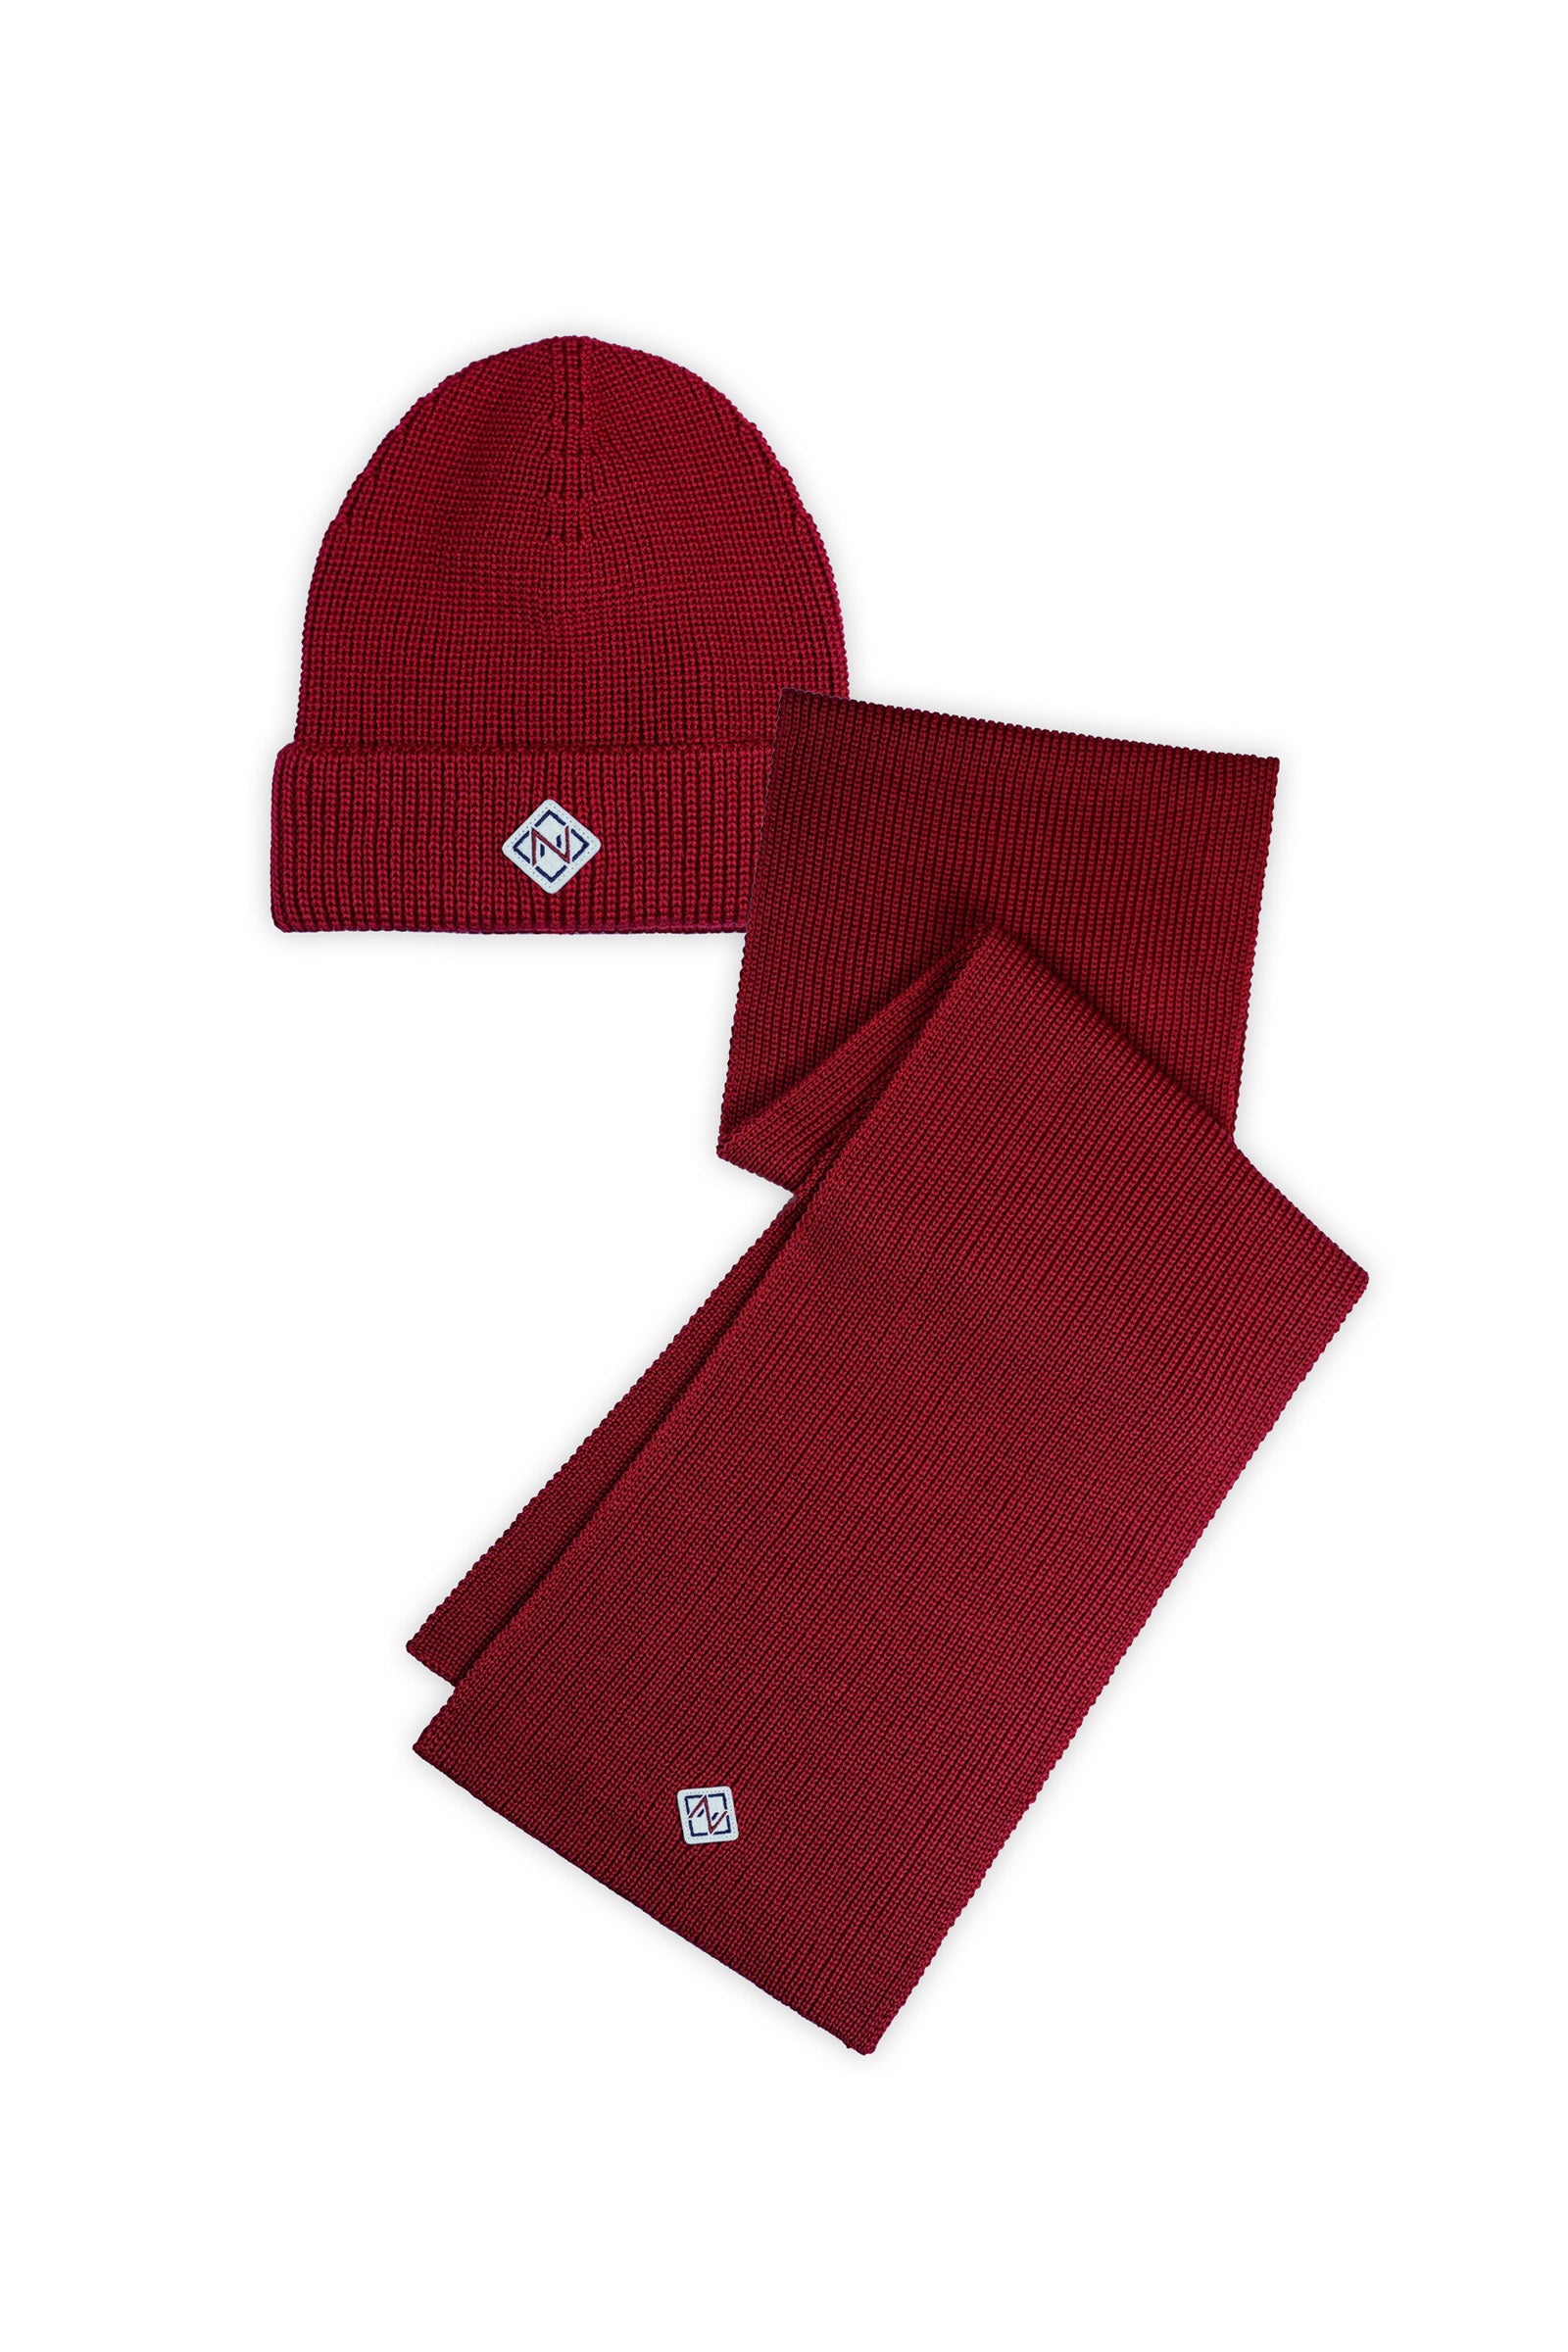 RED HAT & RED SCARF